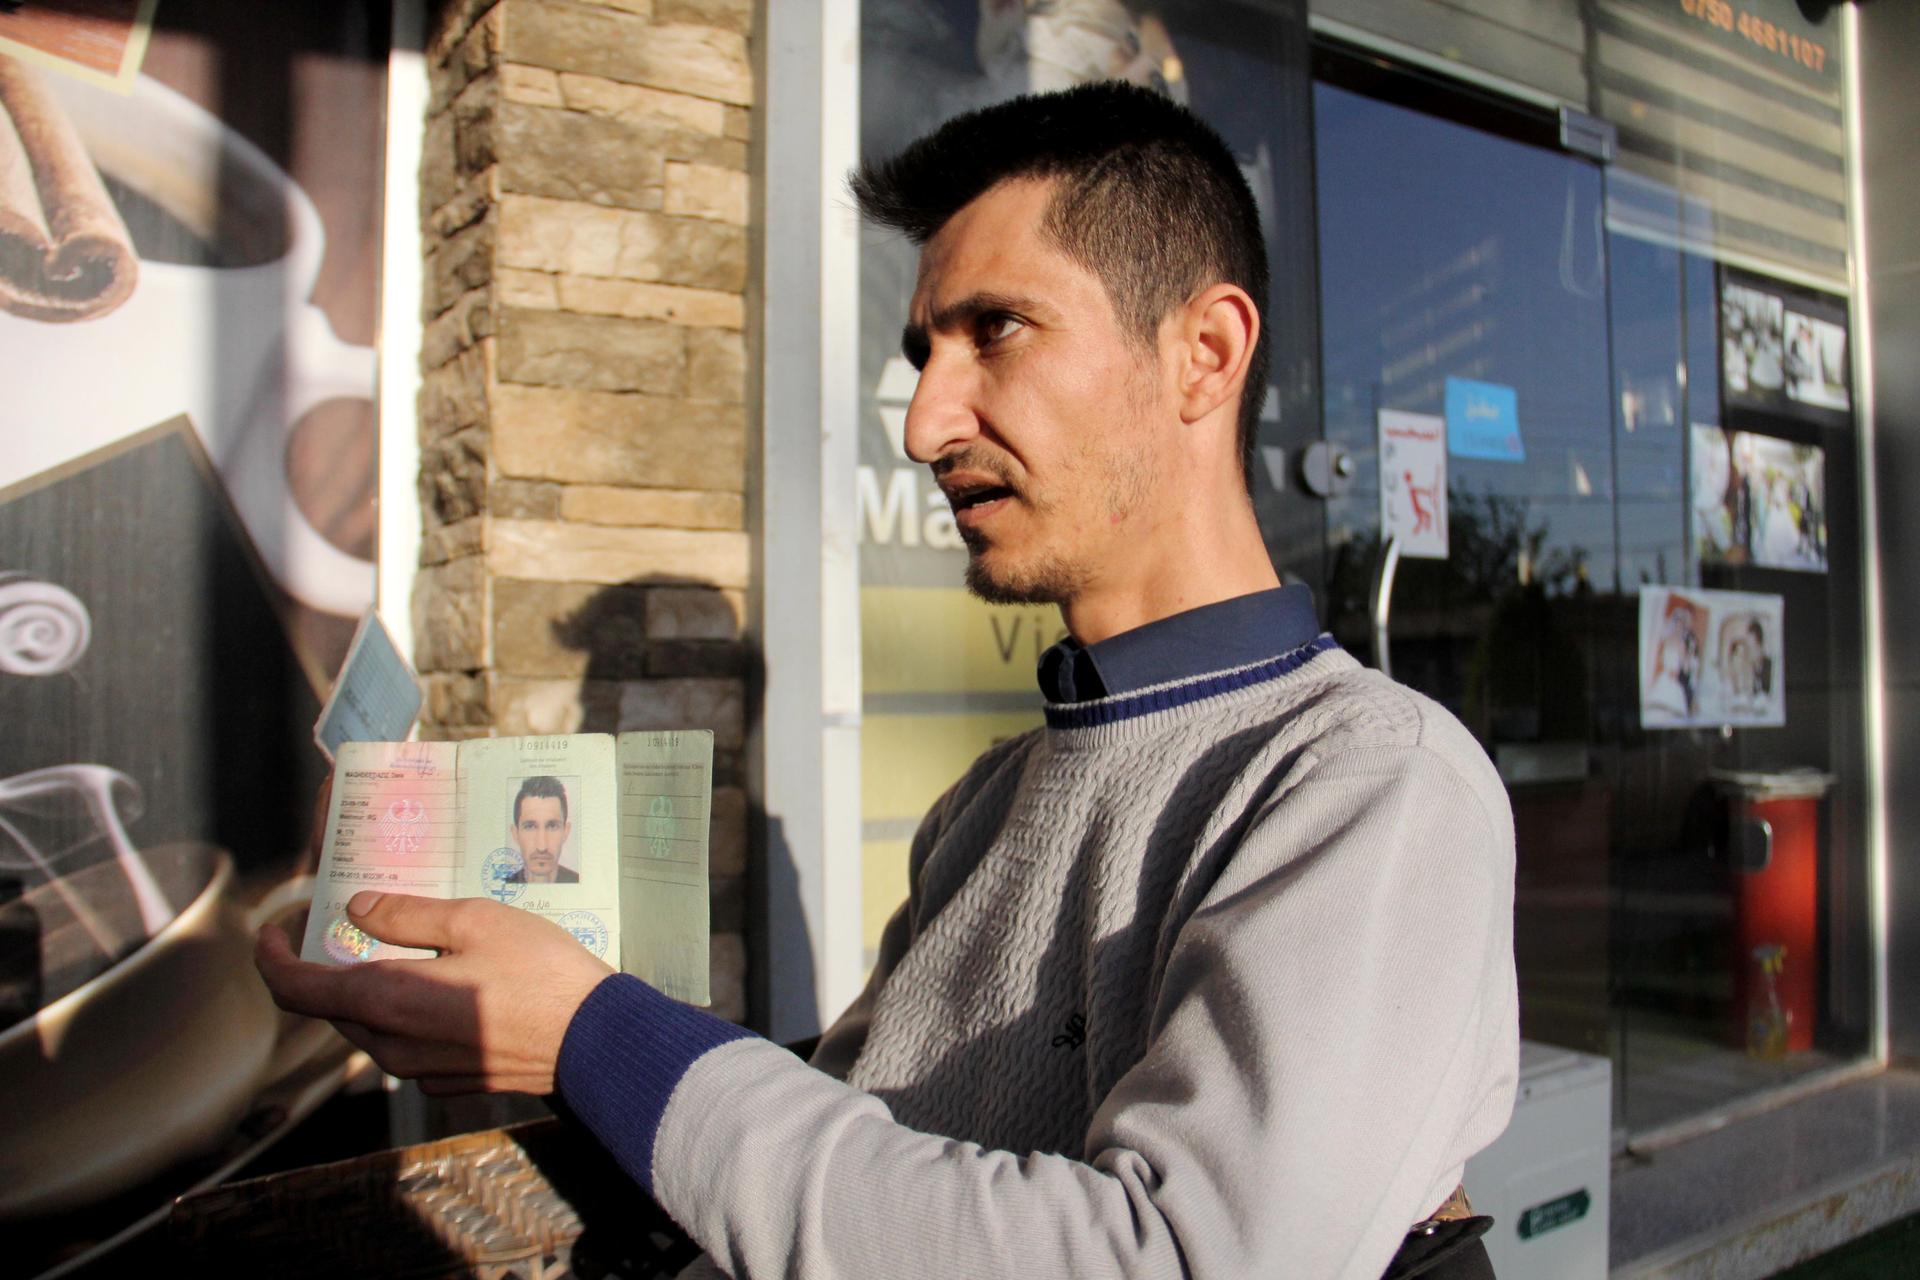 Dana Maghdeed Aziz holds up the identification issued to him by the Germany government.